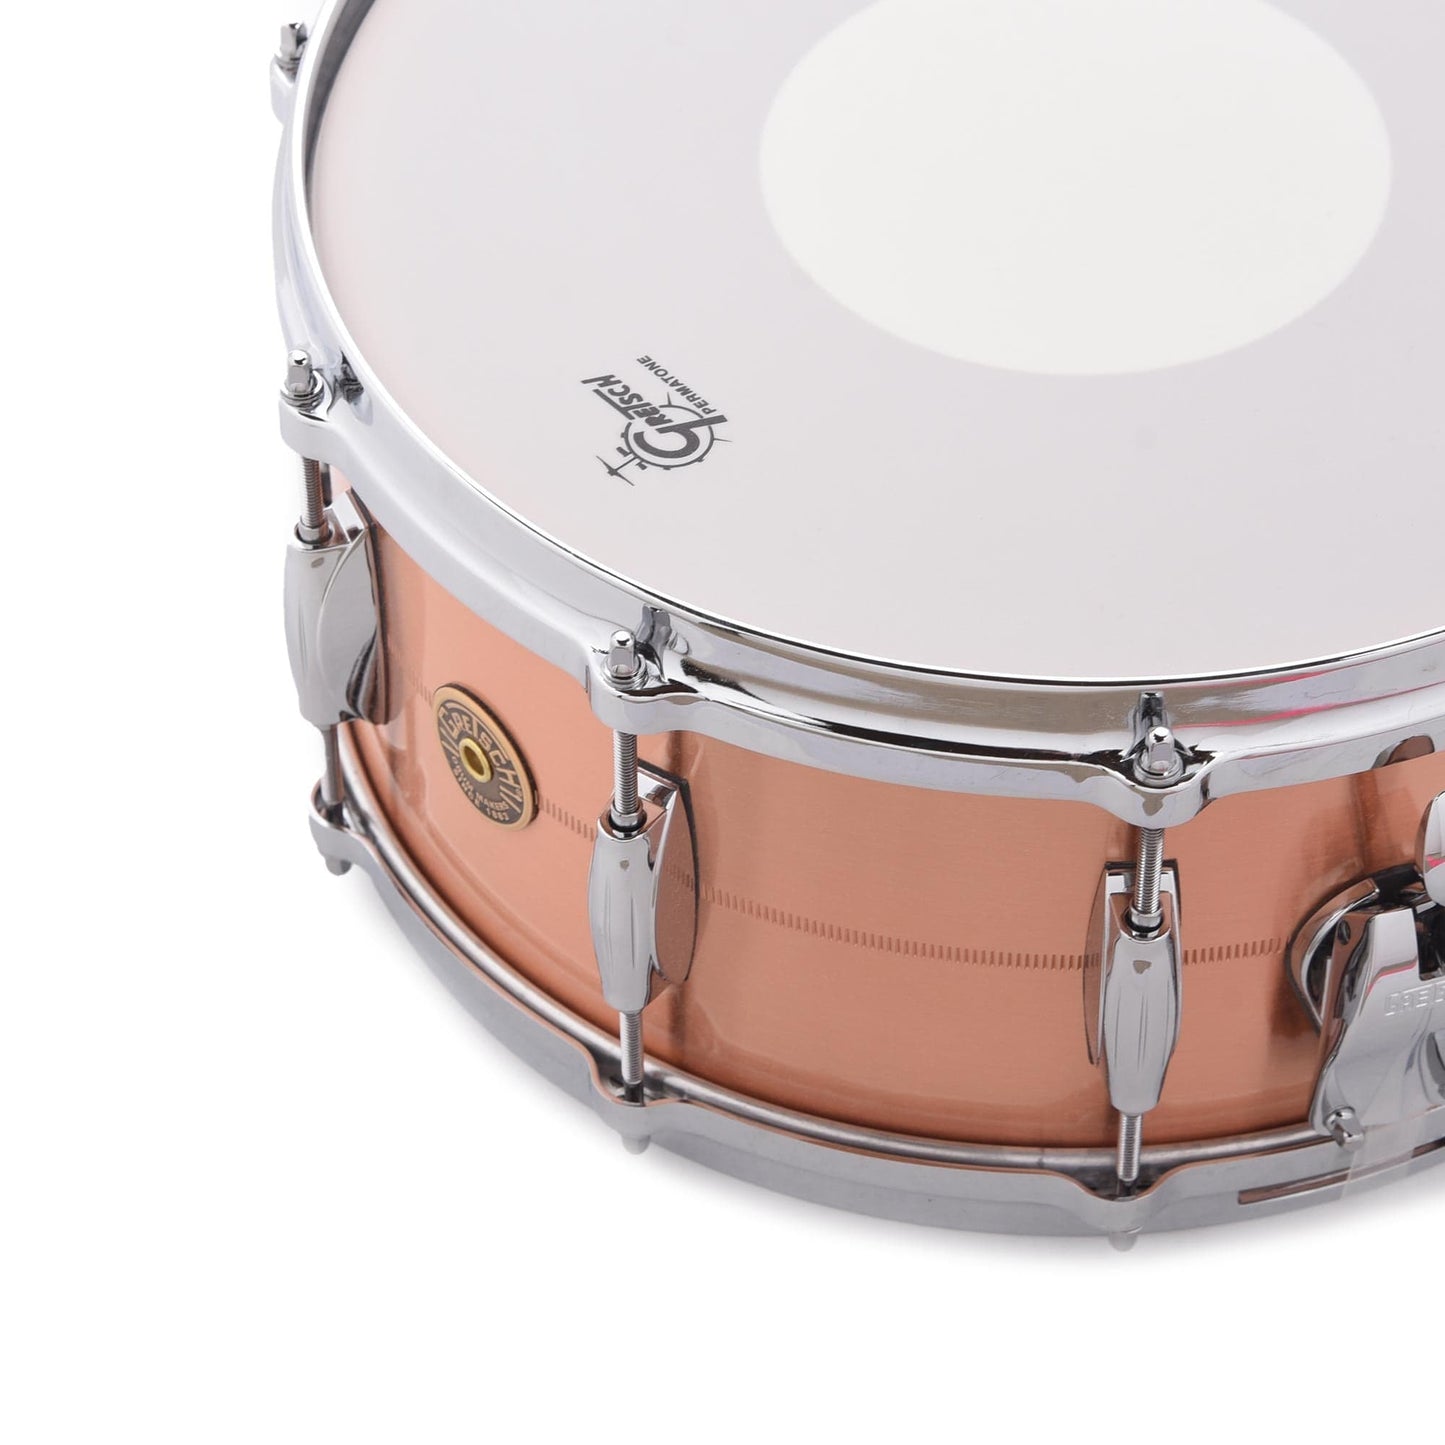 Gretsch 6.5x14 USA Custom 2mm Copper Snare Drum Drums and Percussion / Acoustic Drums / Snare